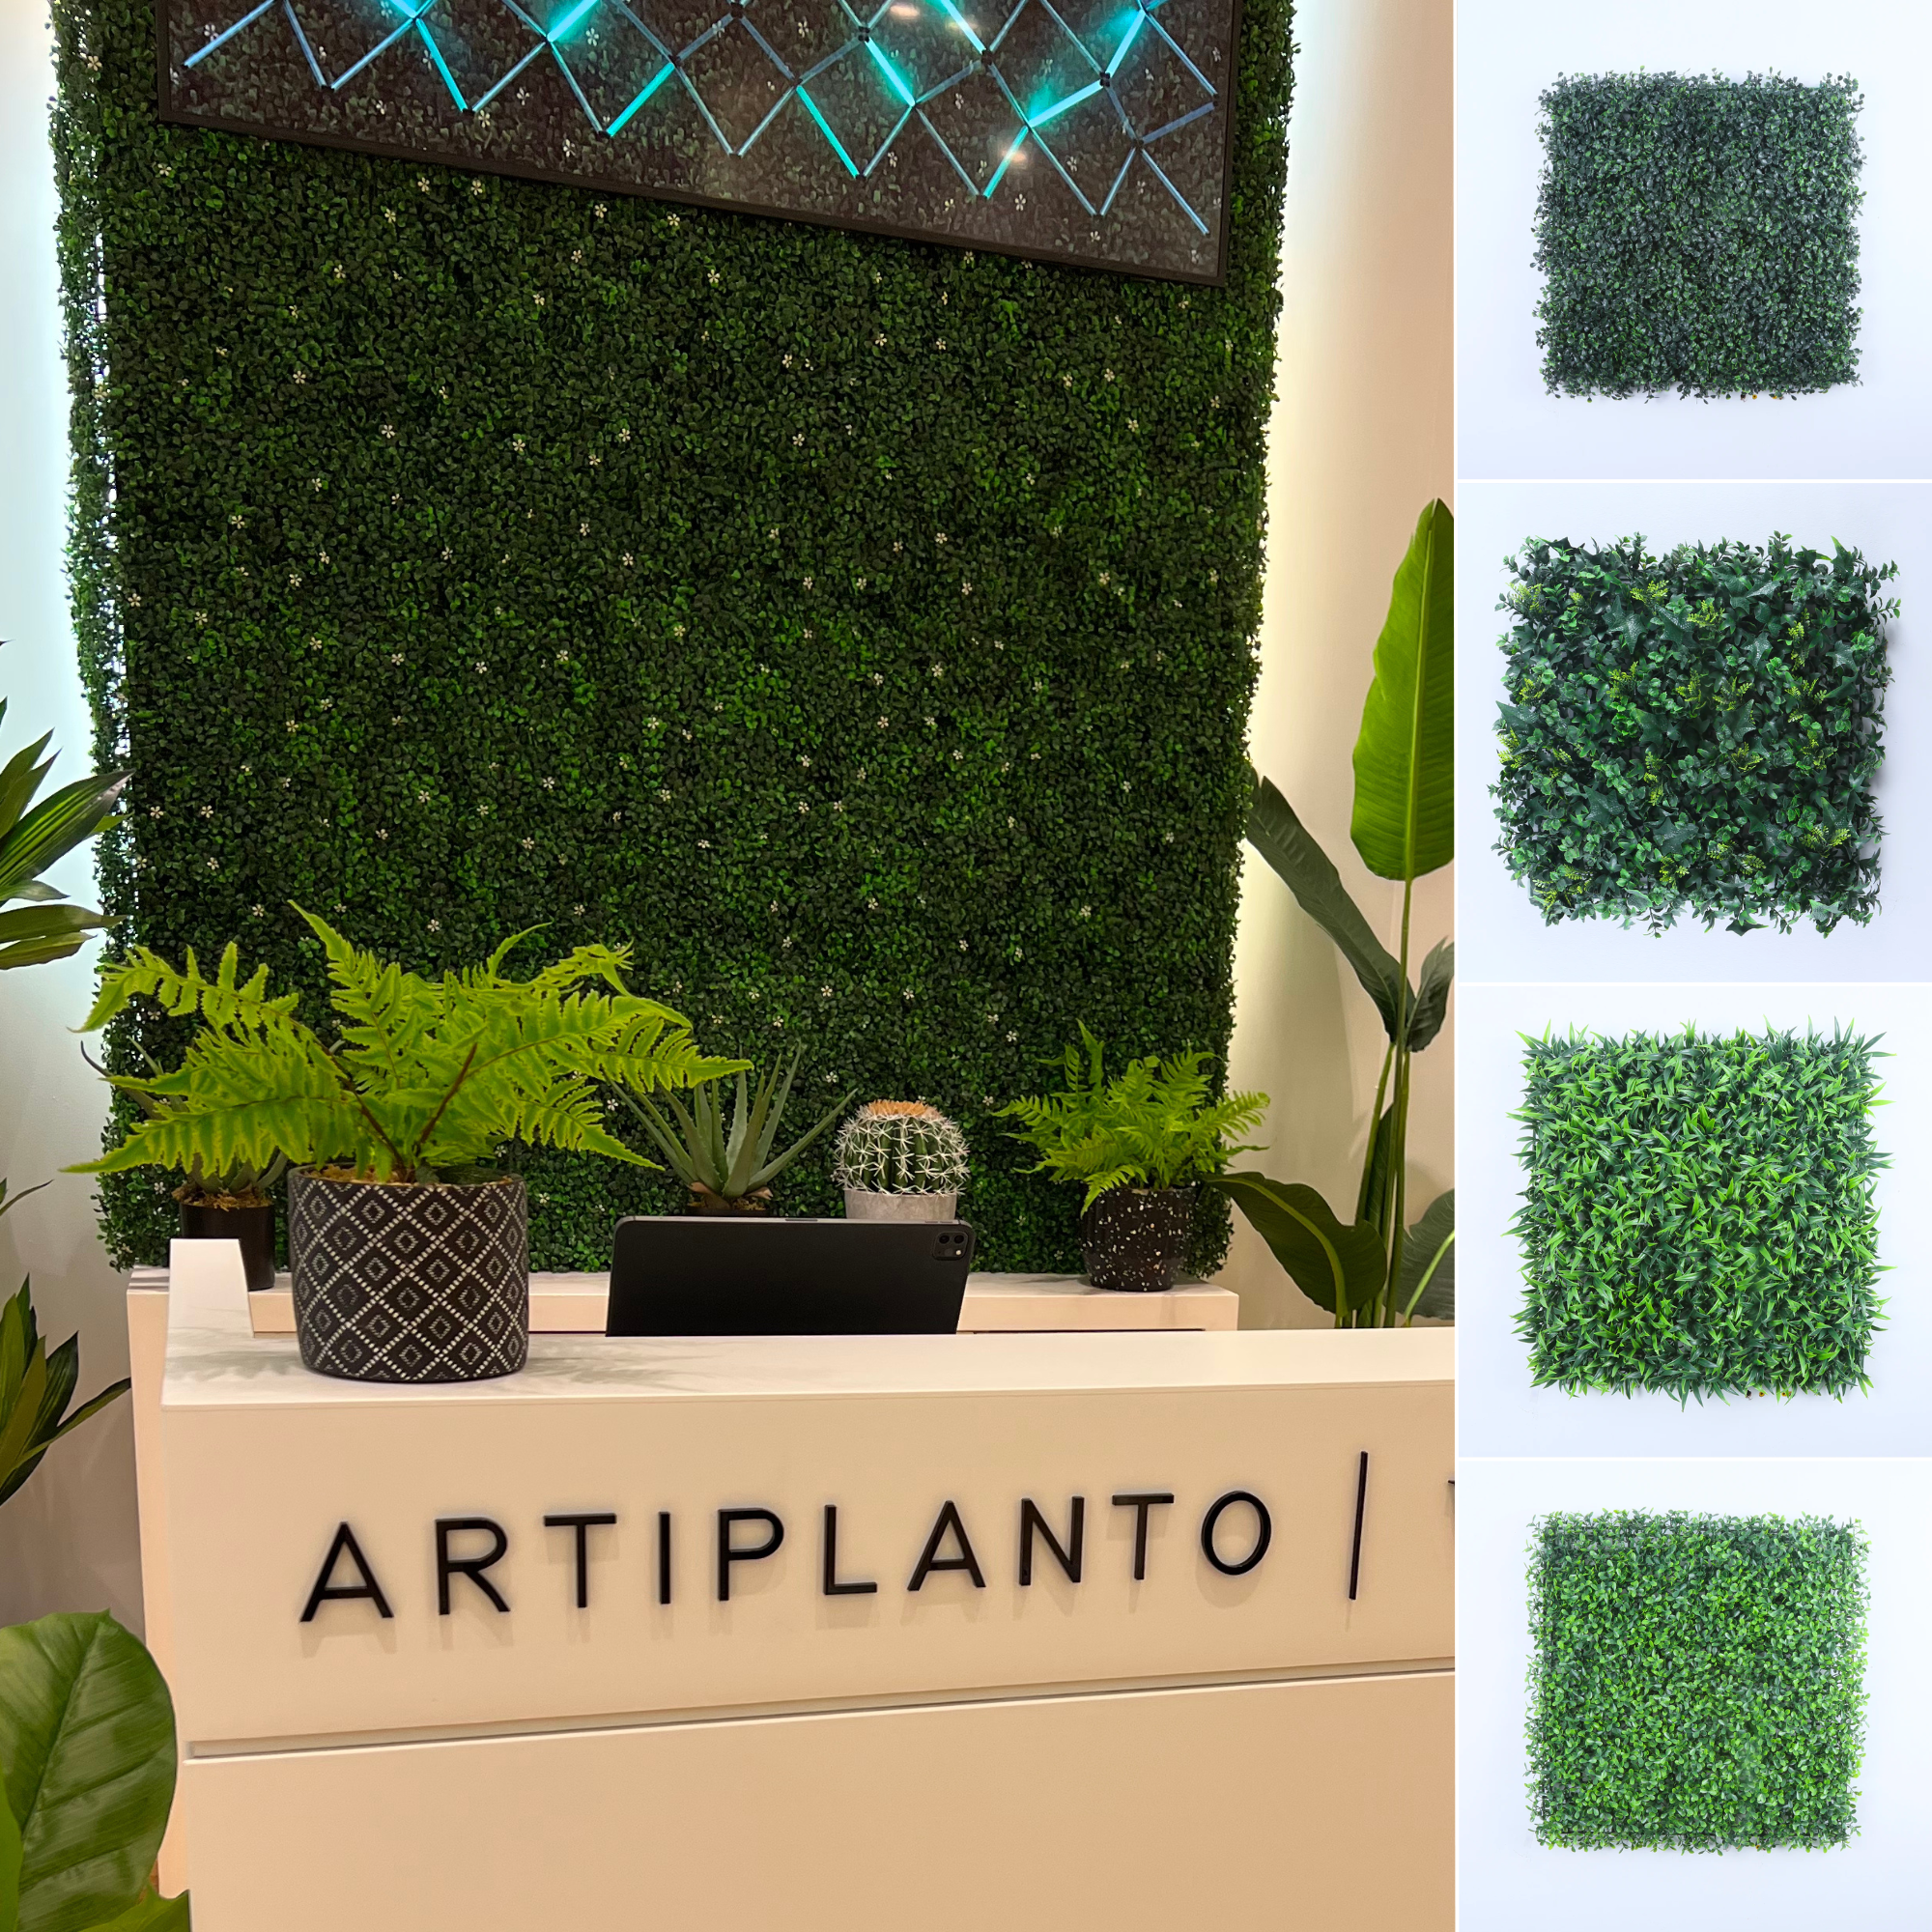 Elevate Your Interior with Artiplanto's Premium Linen Rugs and Pre-Order Green Walls for a Refreshing Touch